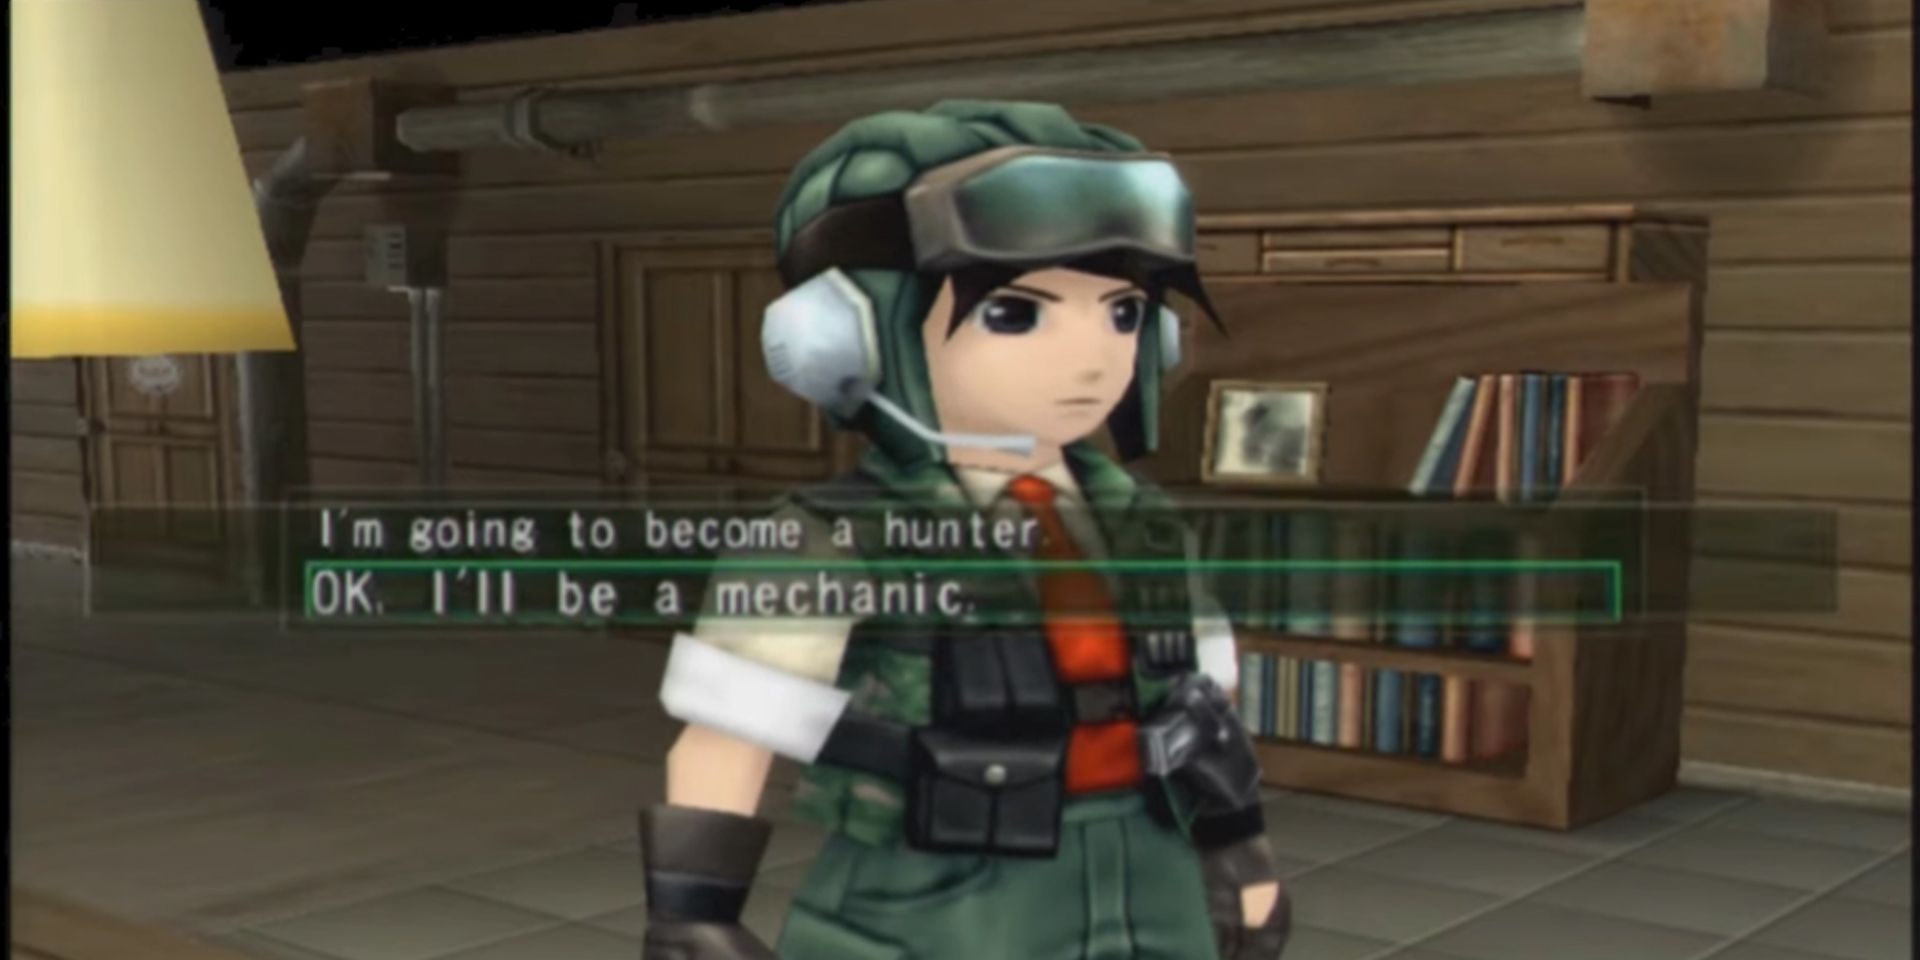 The player is given a choice on whether to be a hunter or mechanic in Metal Saga.